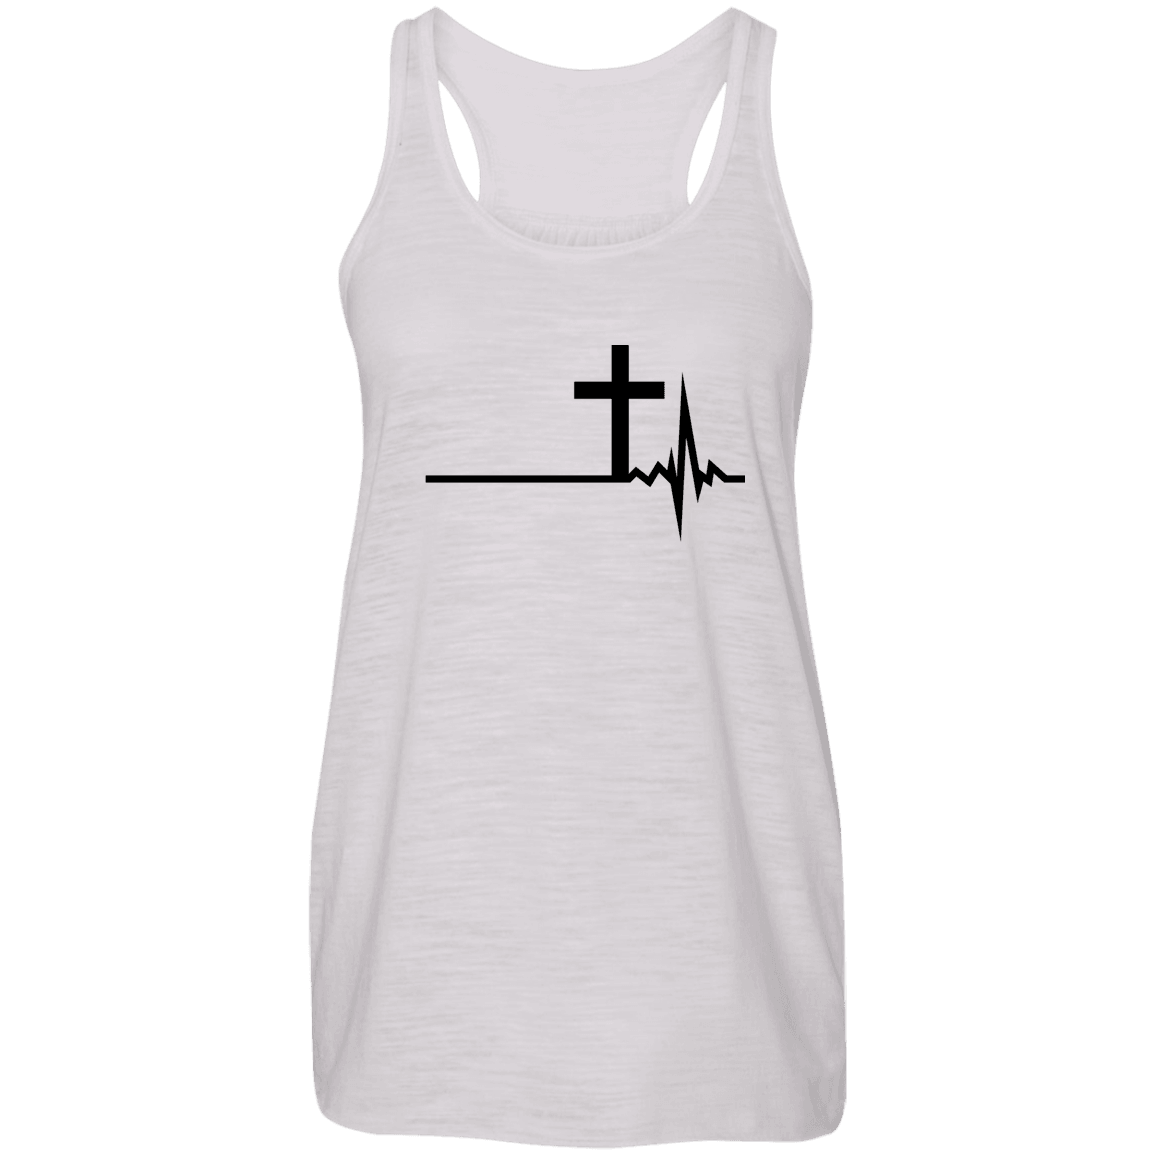 Designs by MyUtopia Shout Out:Cross Heartbeat Ladies Flowy Racer-back Tank Top - White,X-Small / Vintage White,Tank Tops